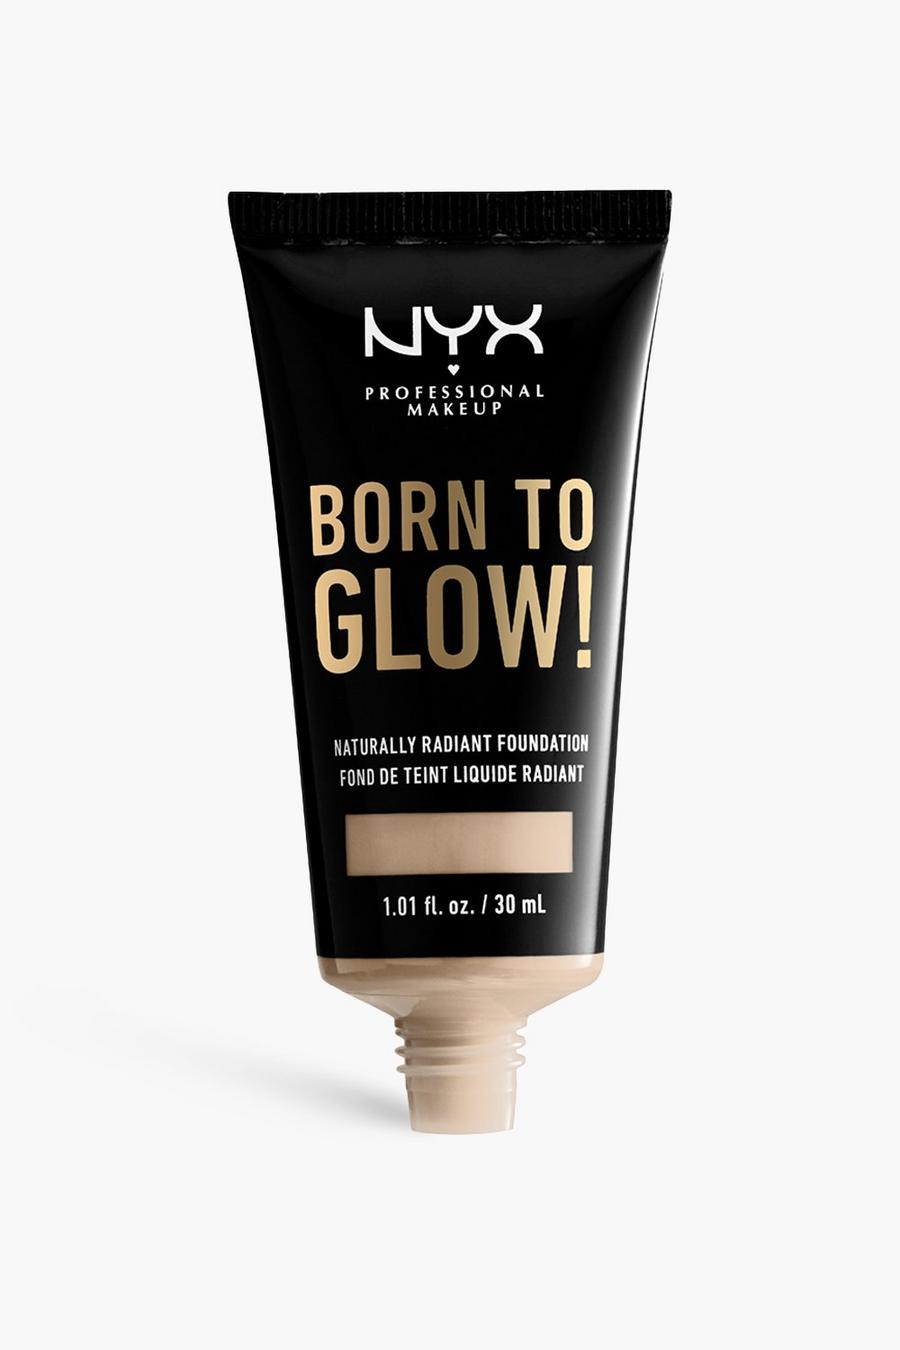 NYX Professional Makeup Born To Glow! Naturally Radiant Foundation, 05 light